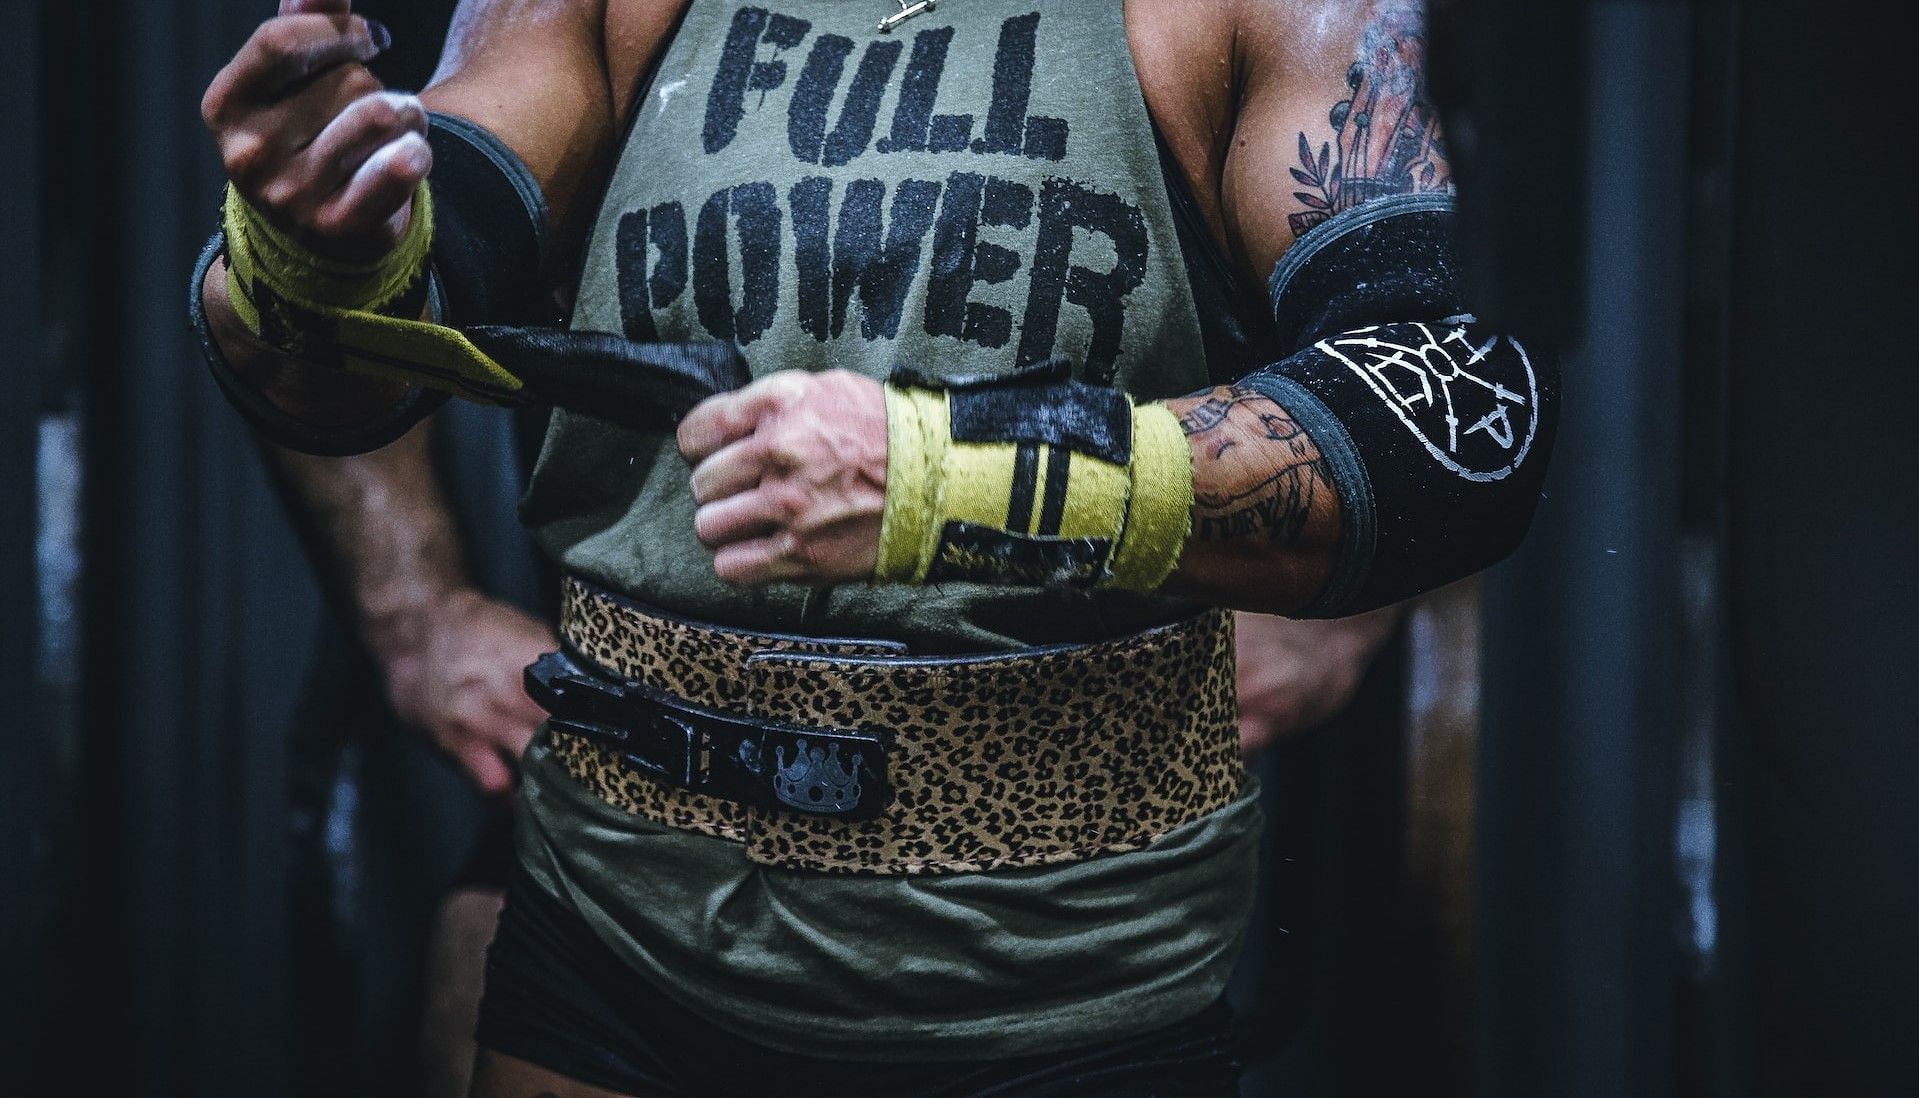 Using lifting belts (Photo by Alora Griffiths on Unsplash)